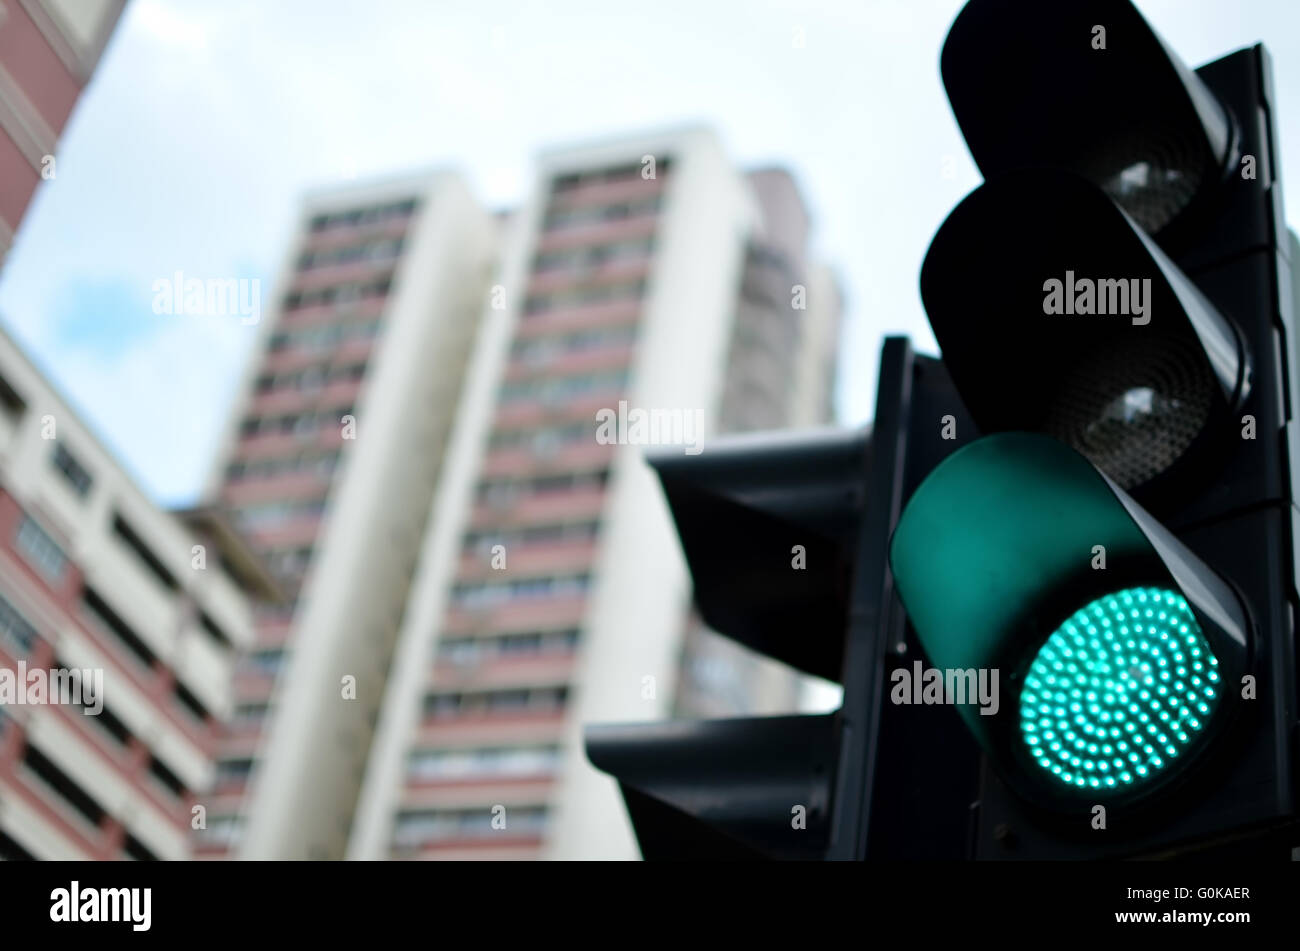 Green traffic light in the city Stock Photo